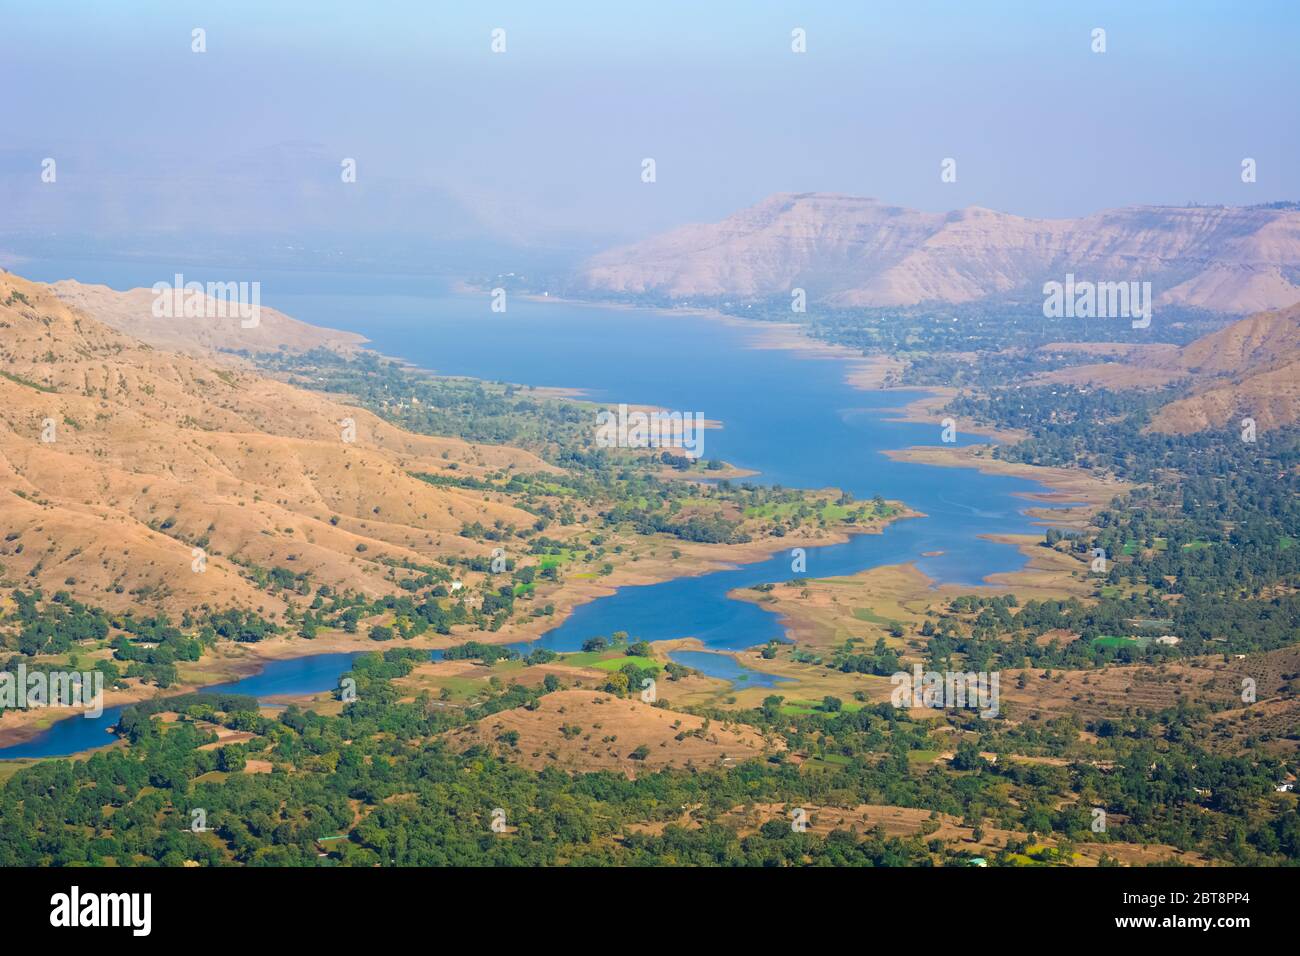 A Natural View Of Indian Mountains. Stock Photo